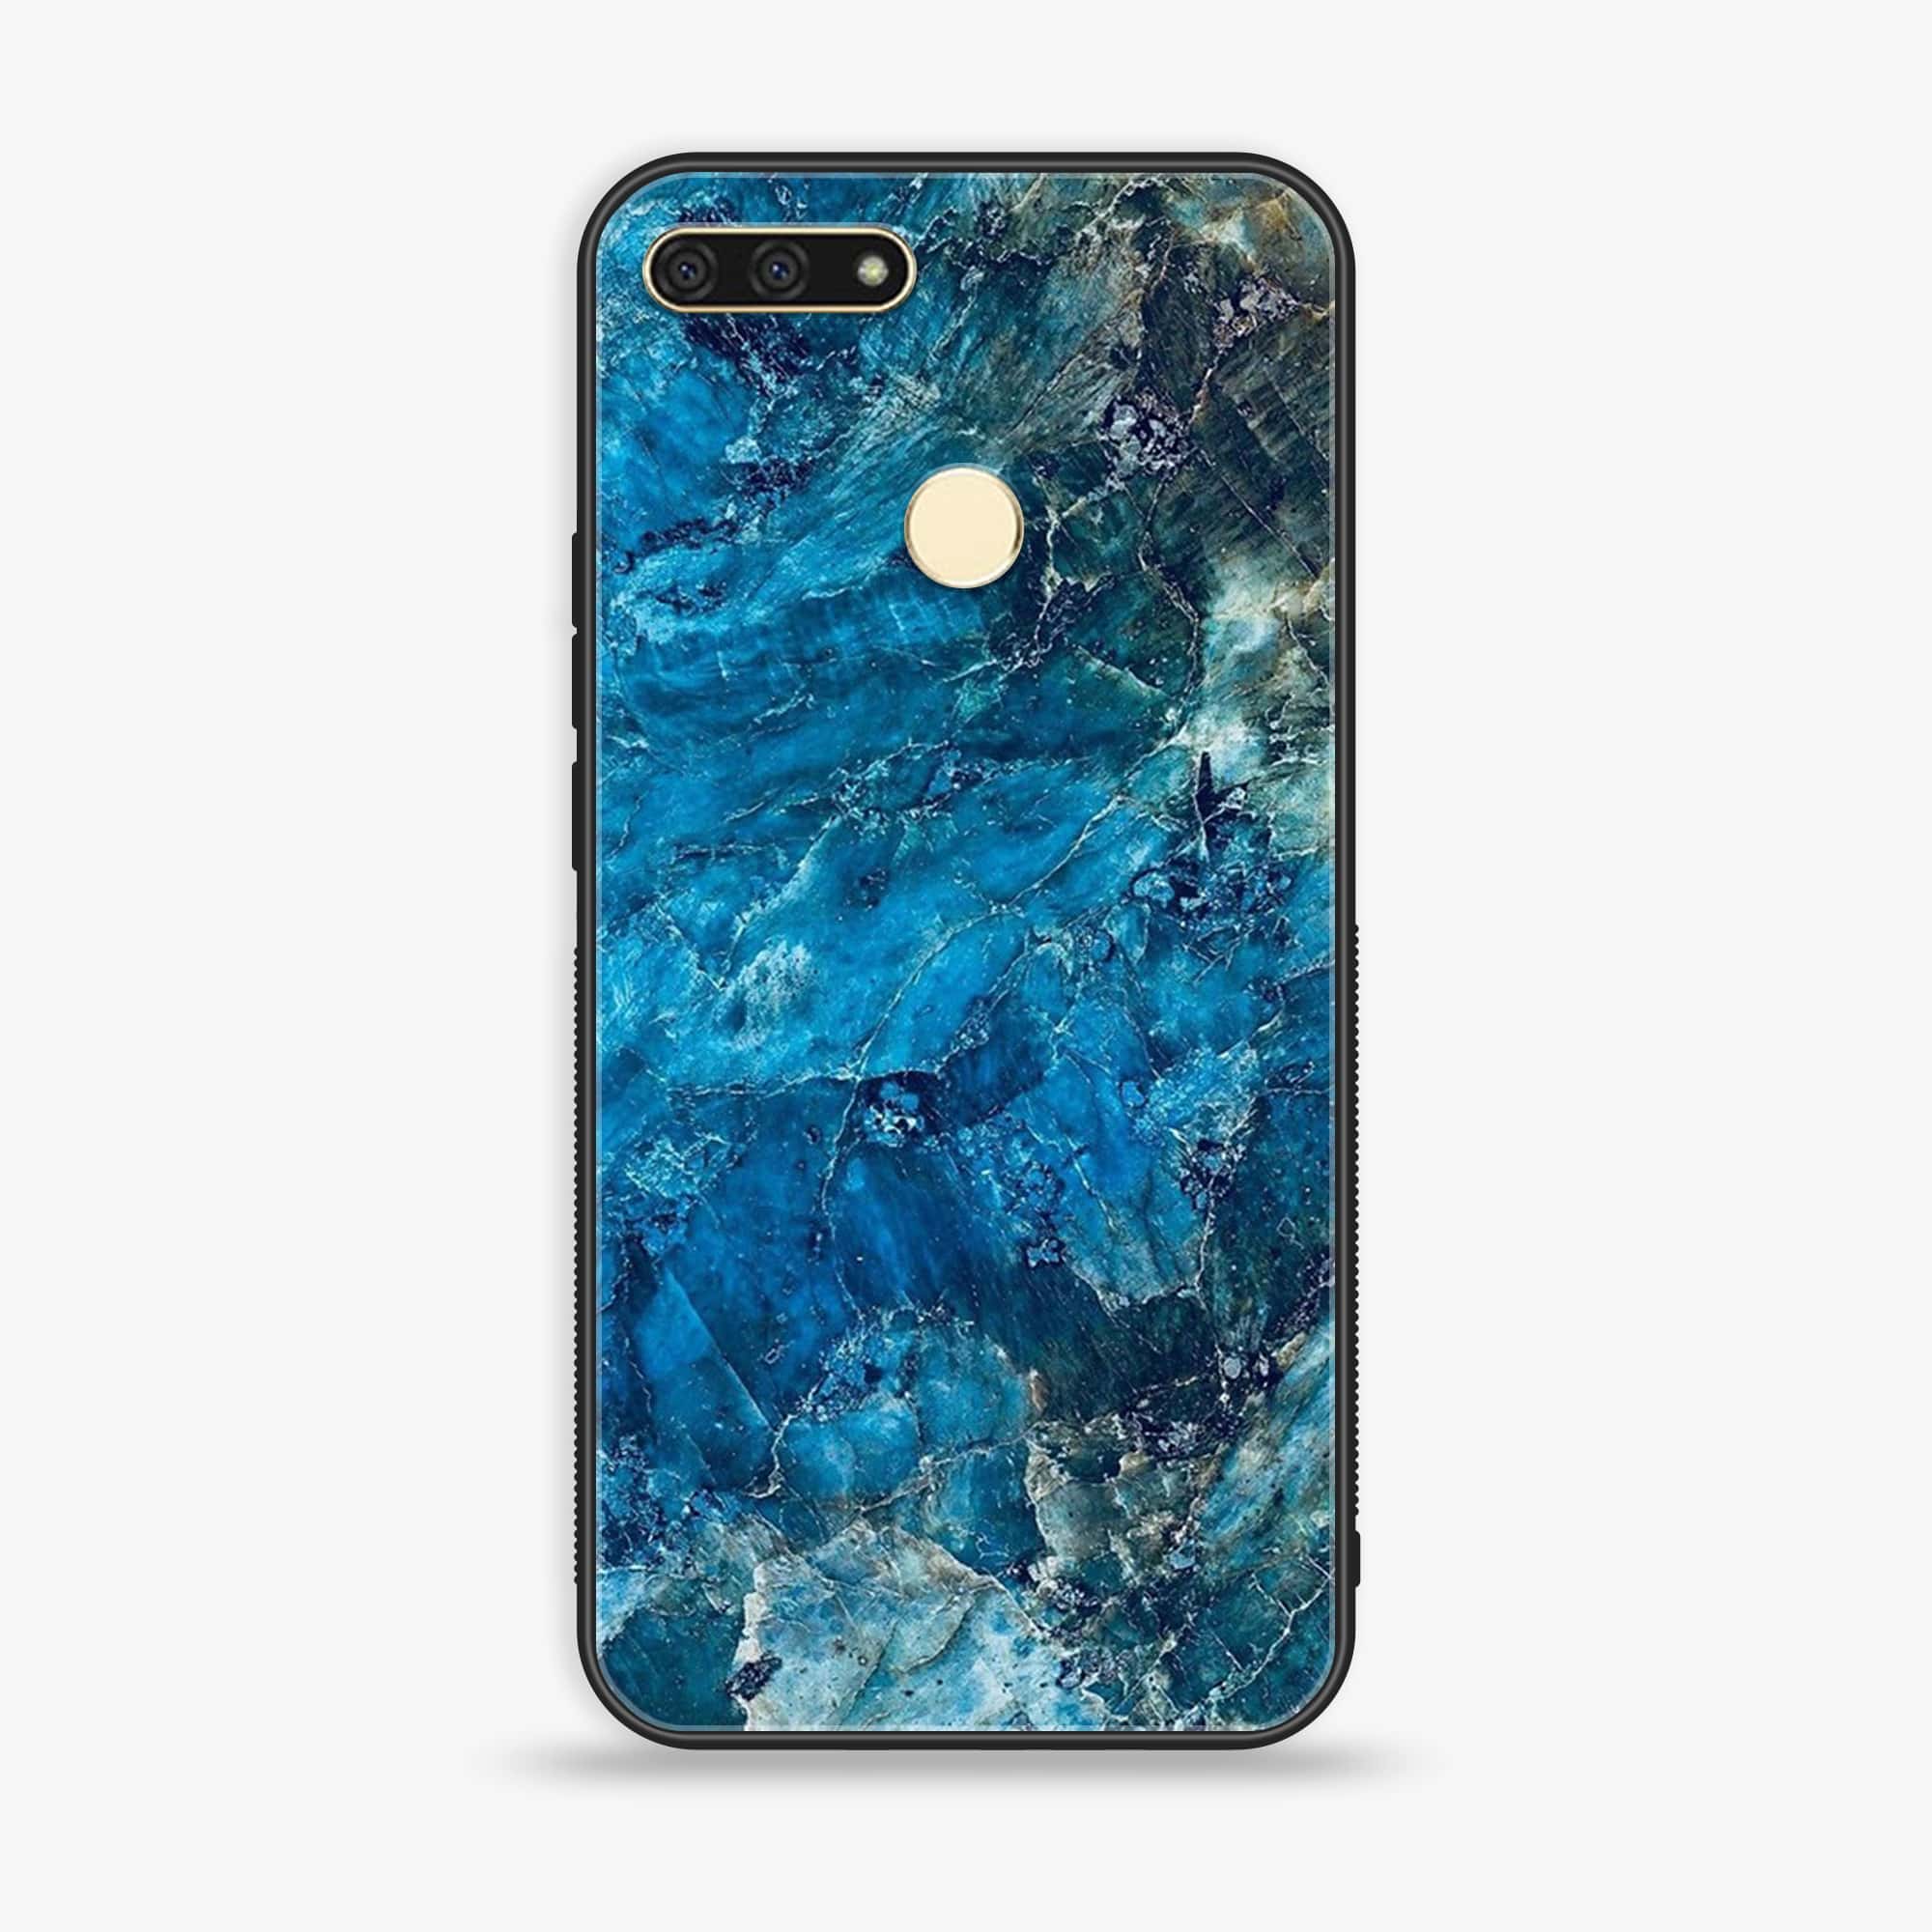 Honor 7A -  Blue Marble Series - Premium Printed Glass soft Bumper shock Proof Case